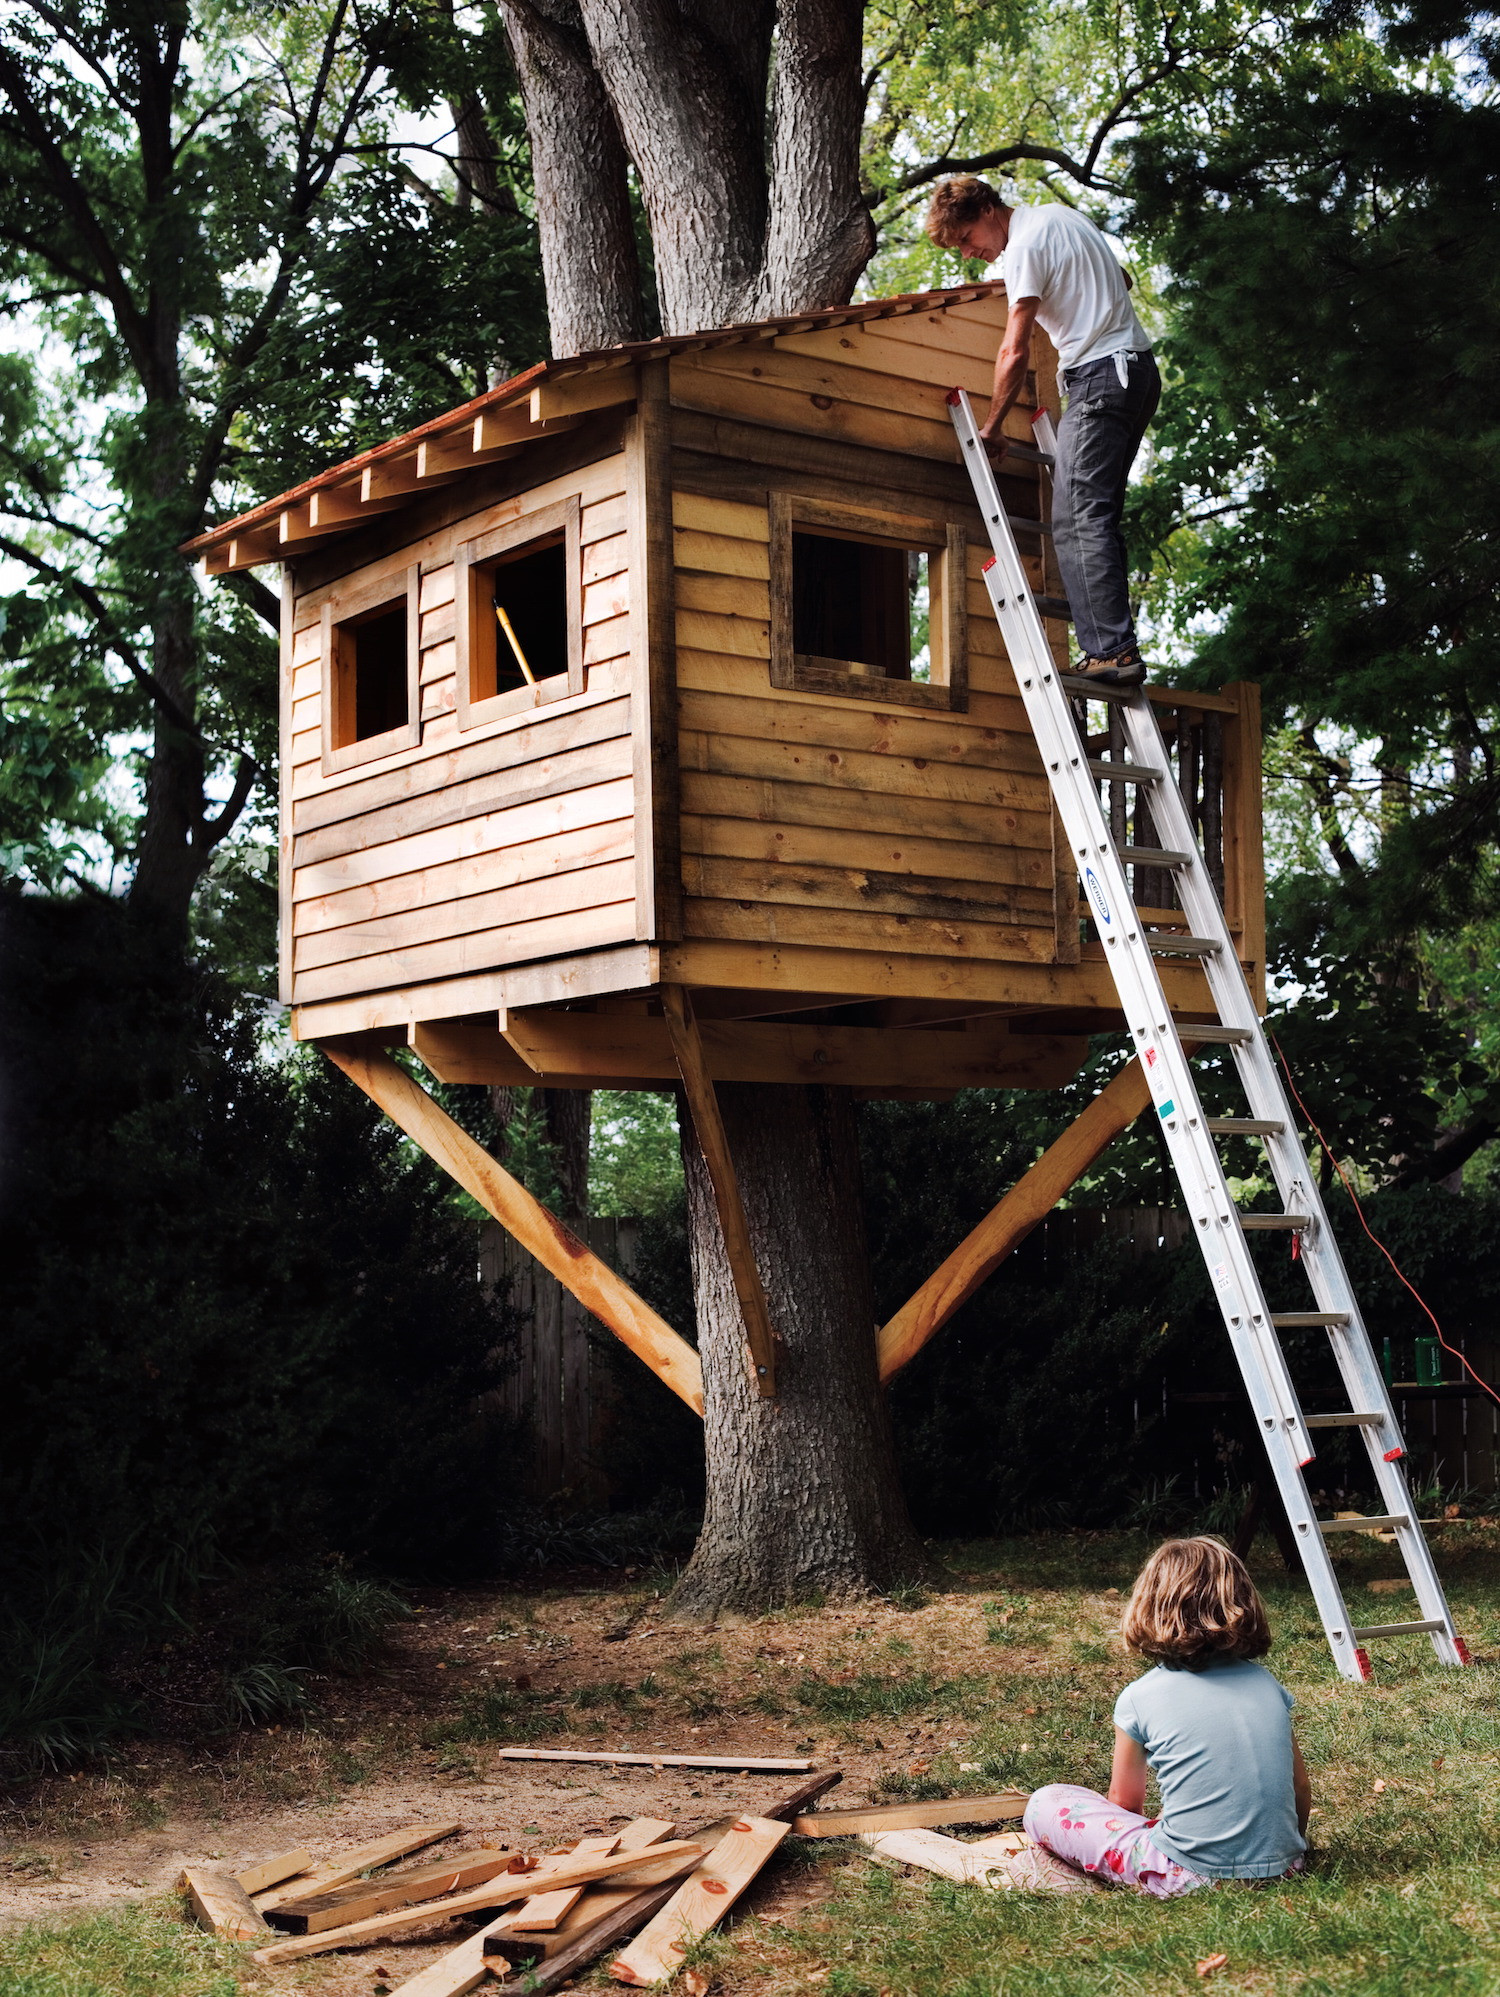 DIY Treehouse Kits
 How to Build a Treehouse for Your Backyard DIY Tree